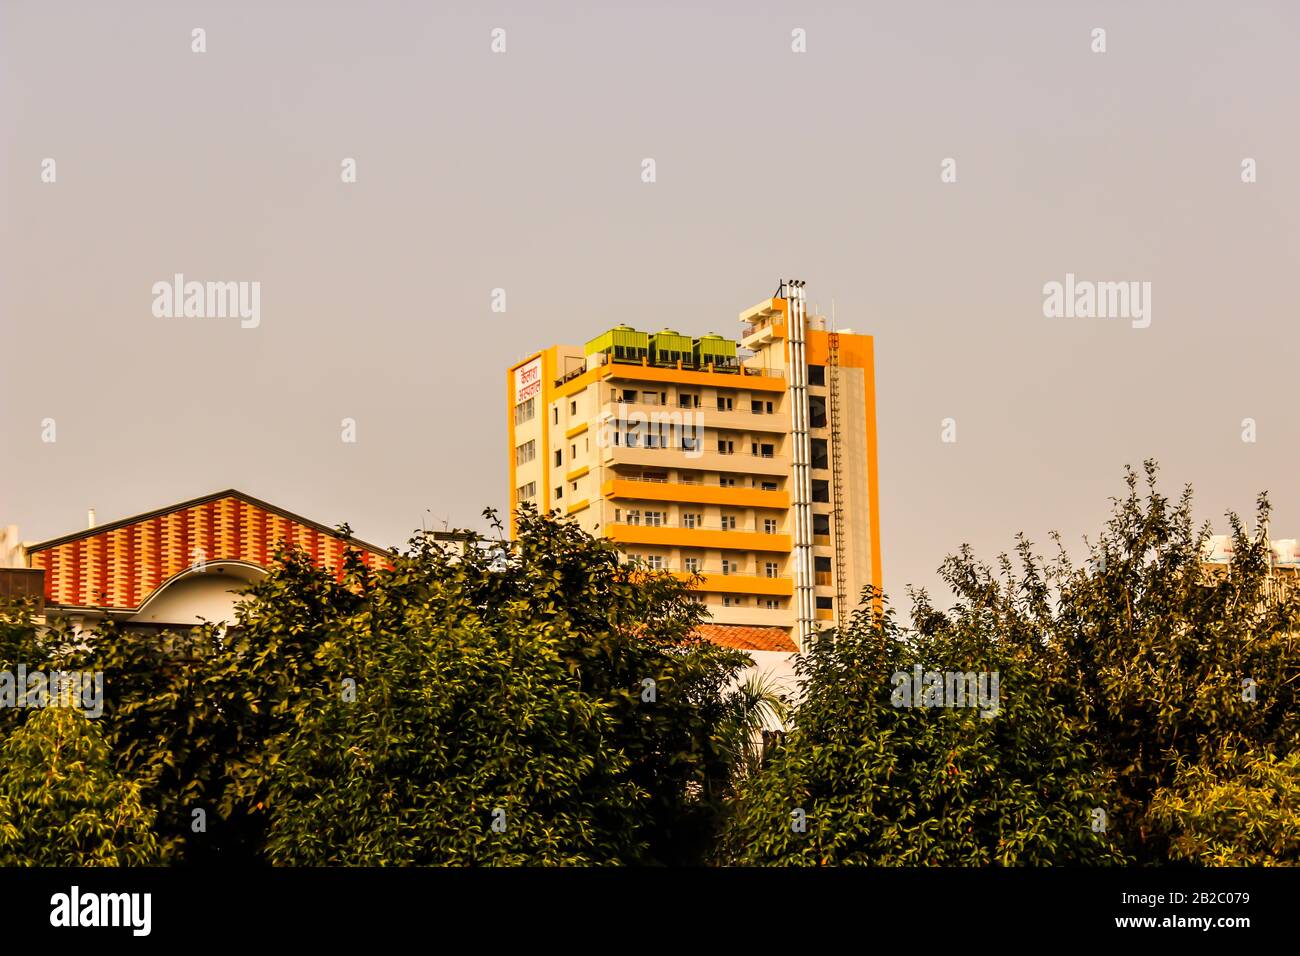 Utter pardesh , India - building , A picture of building with sky background 1 march 2020 Stock Photo